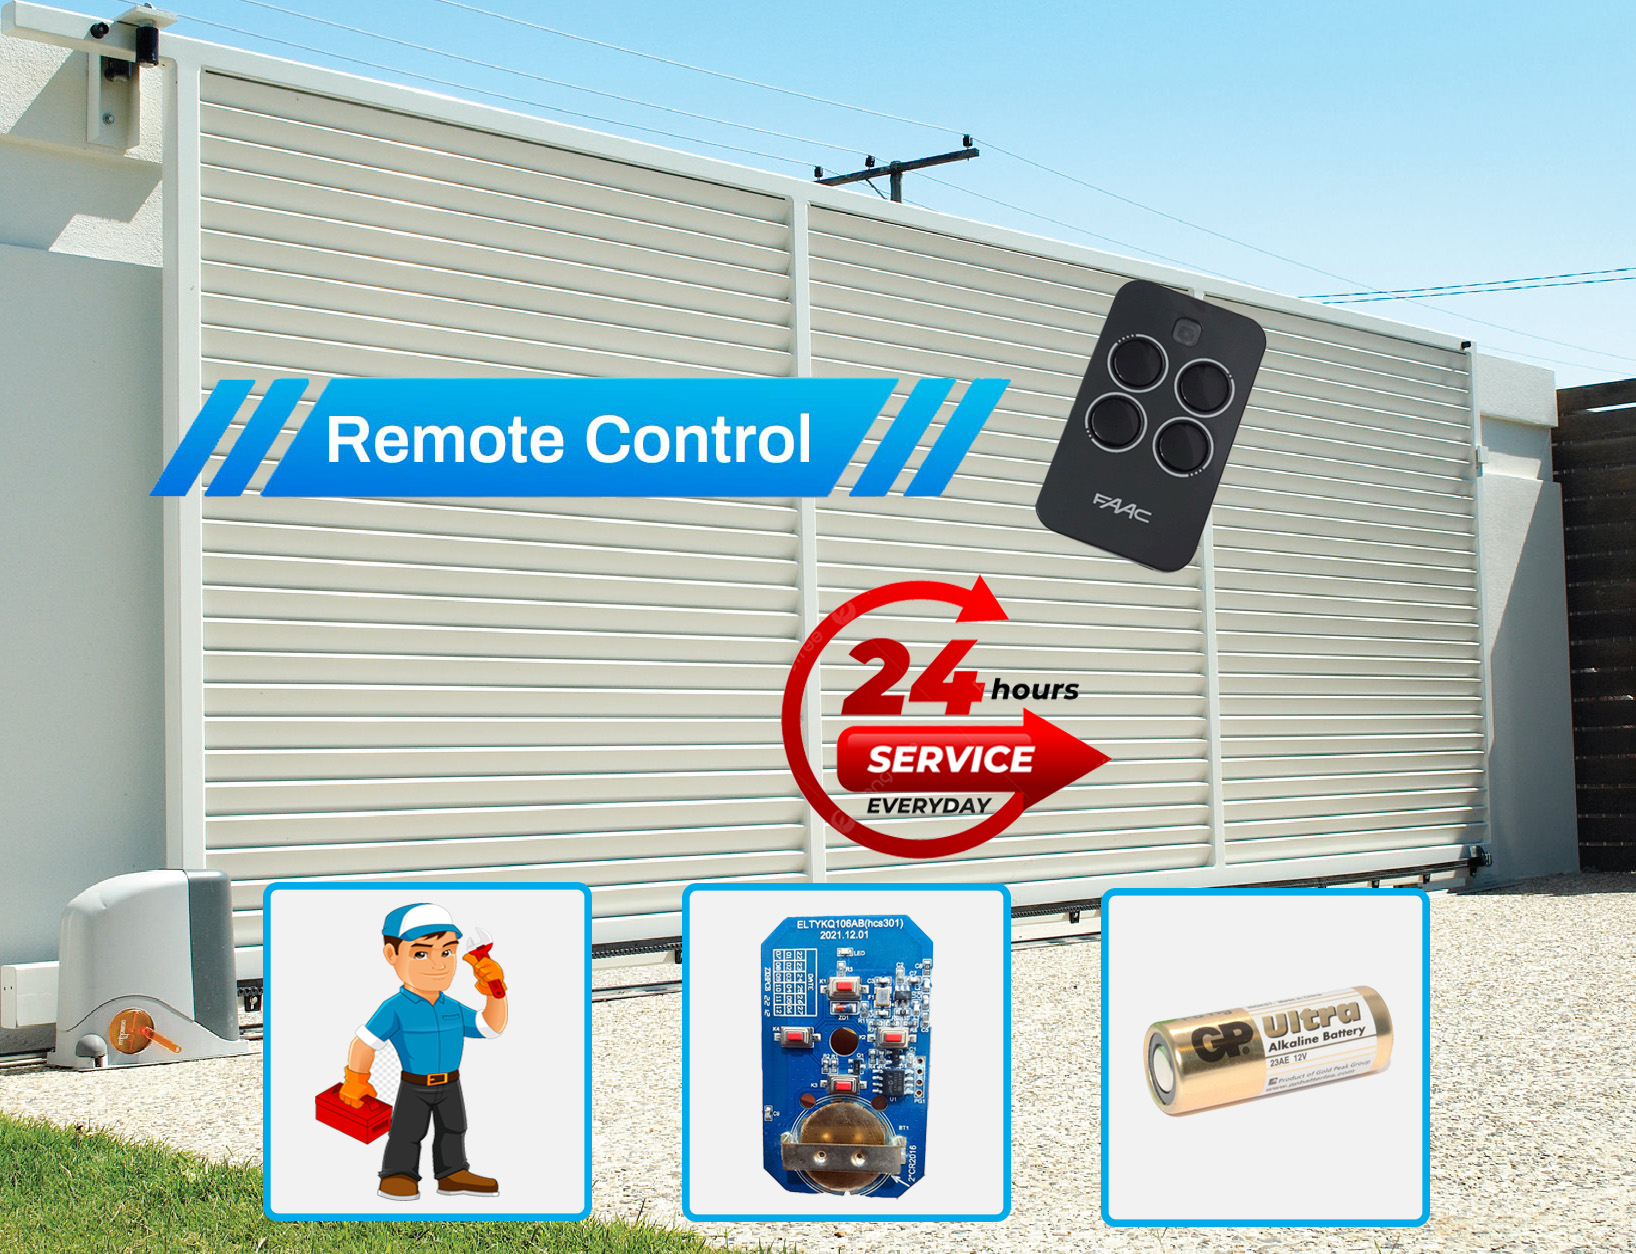 Dịch vụ thay remote cổng